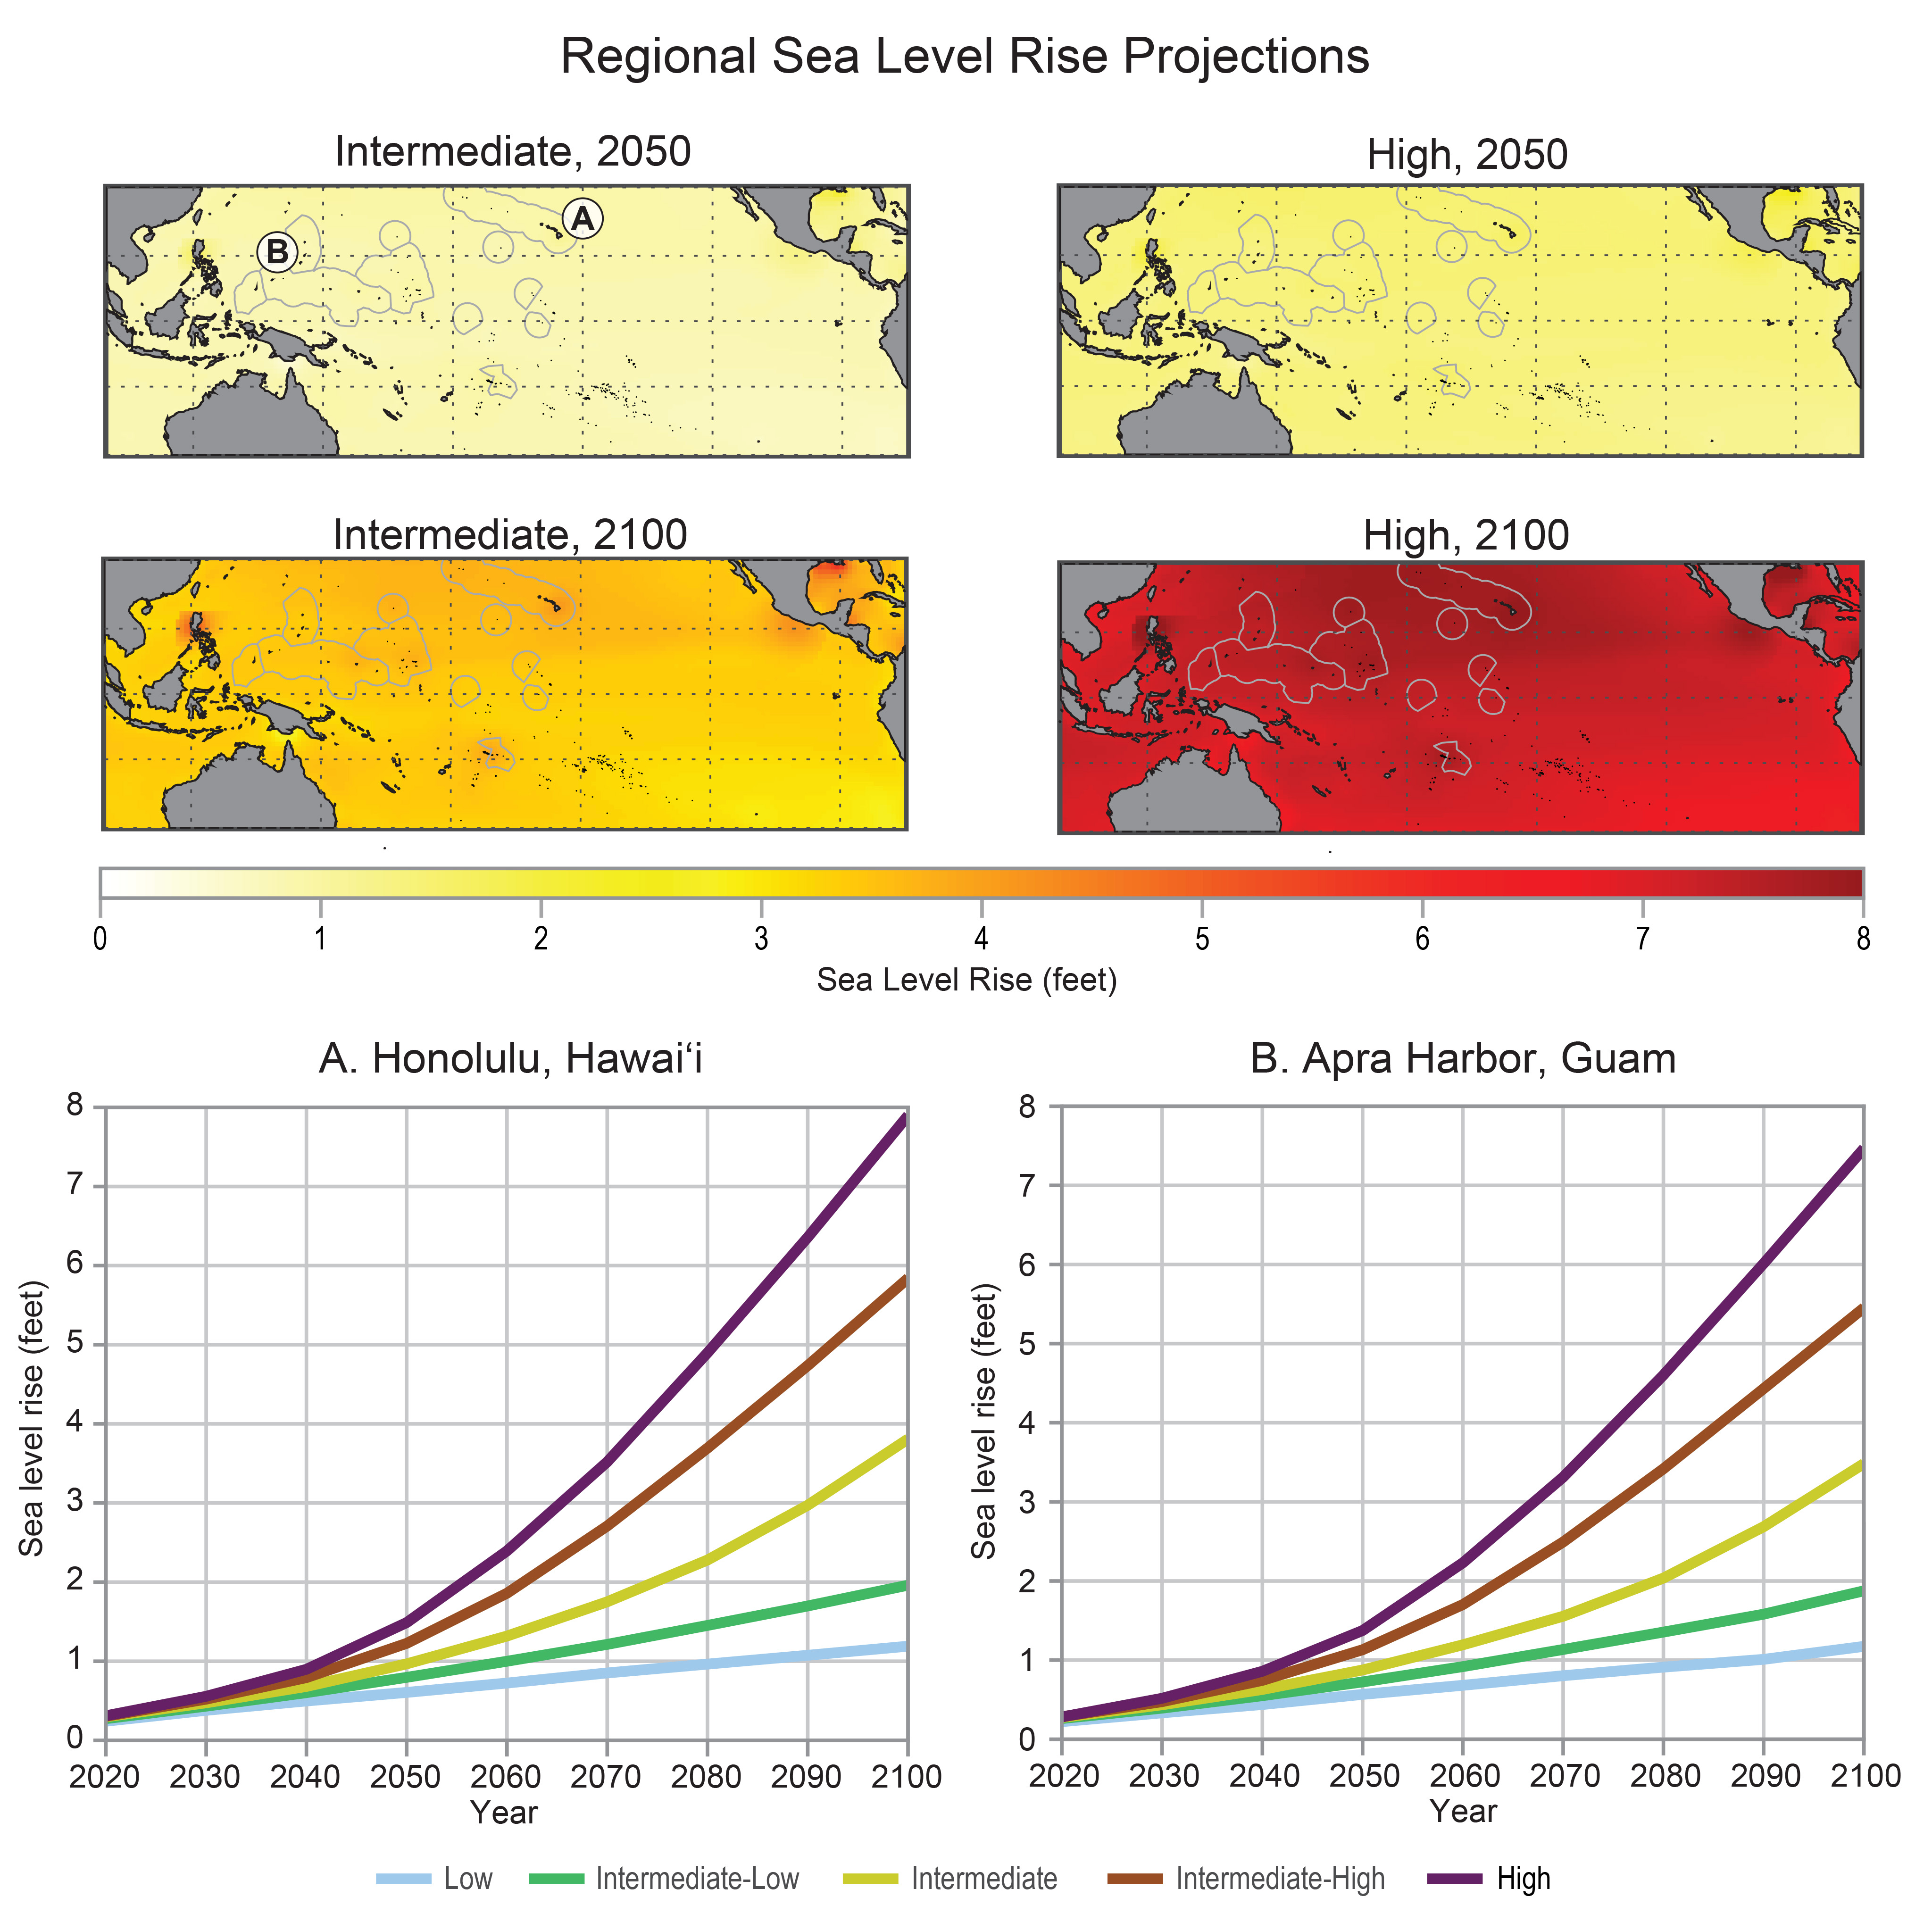 Regional Sea Level Rise Projections